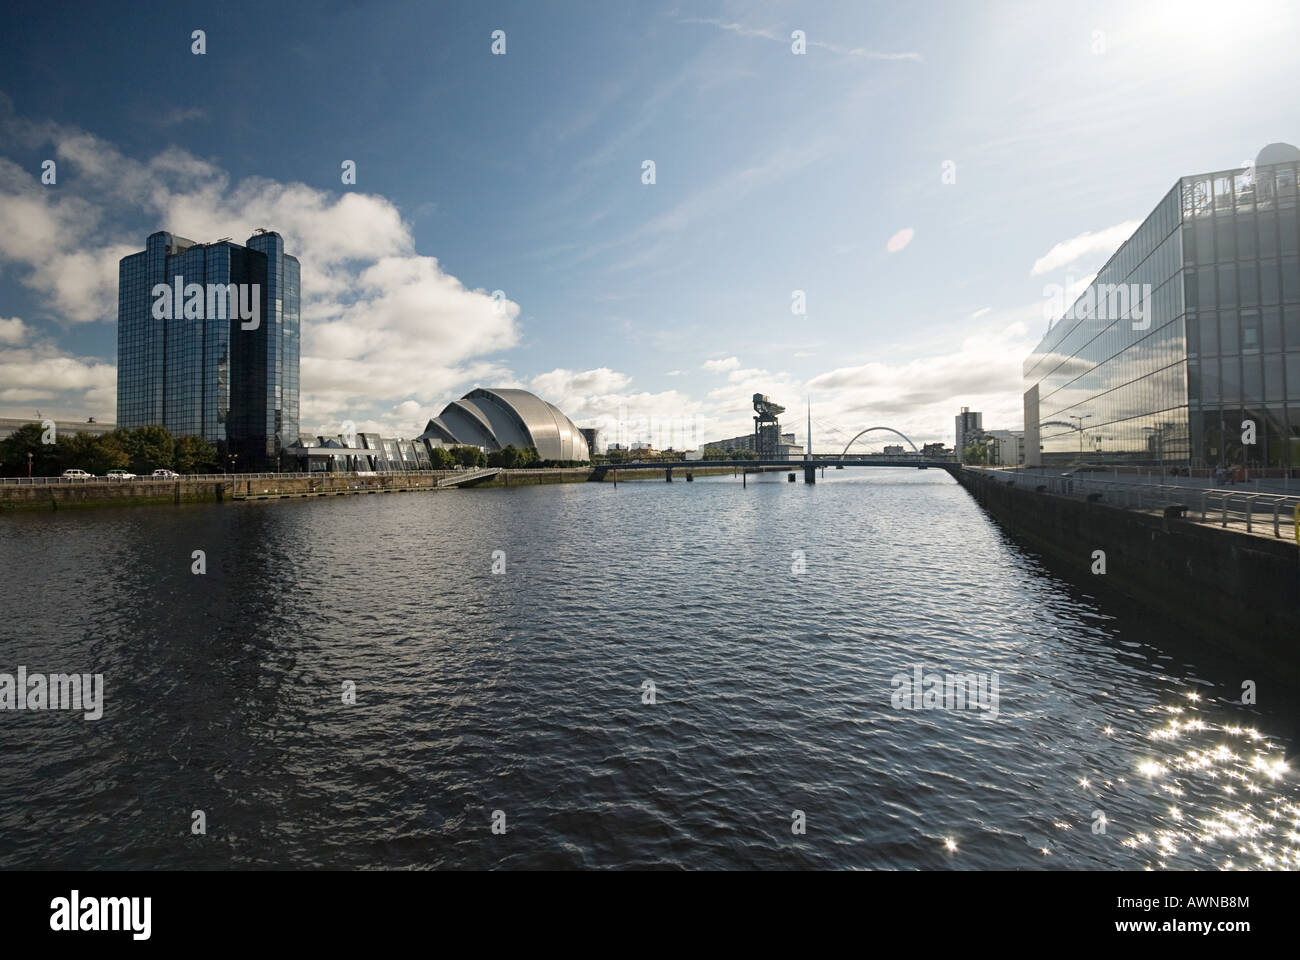 River clyde with clyde auditorium Stock Photo